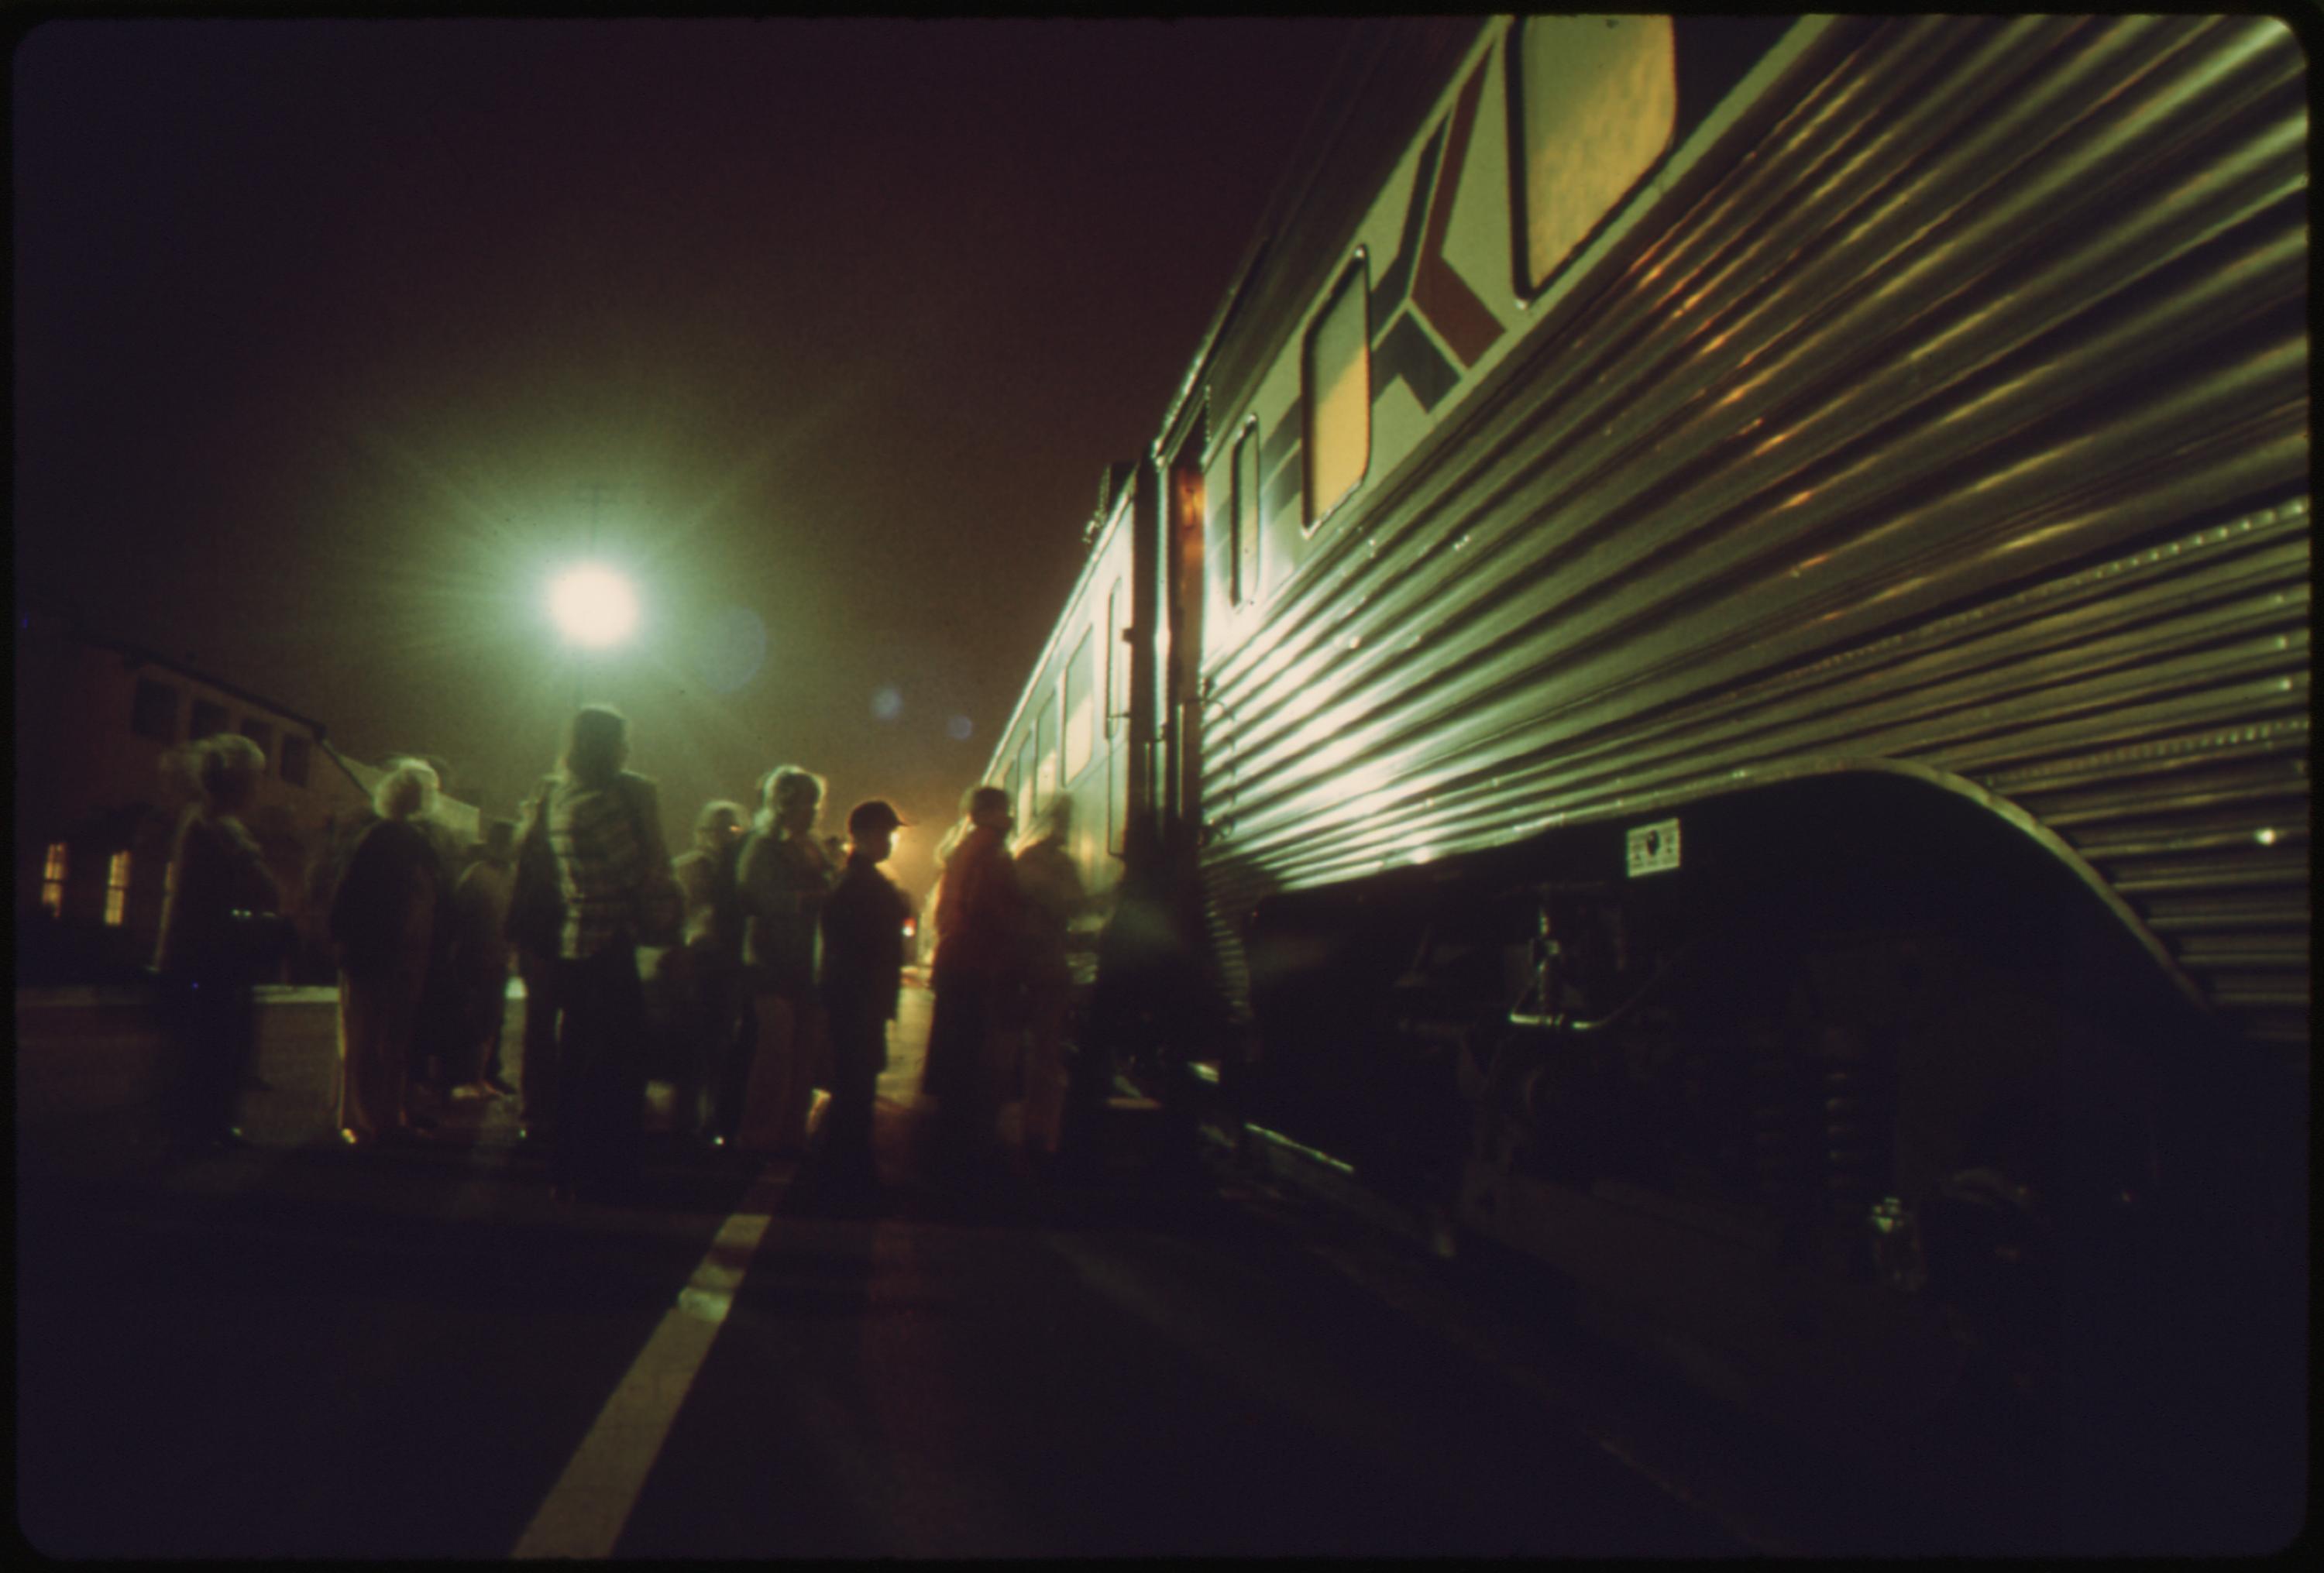 Amtrak passengers board the southbound san diegan as it makes a nighttime stop at the Fullerton, California, station, May 1974